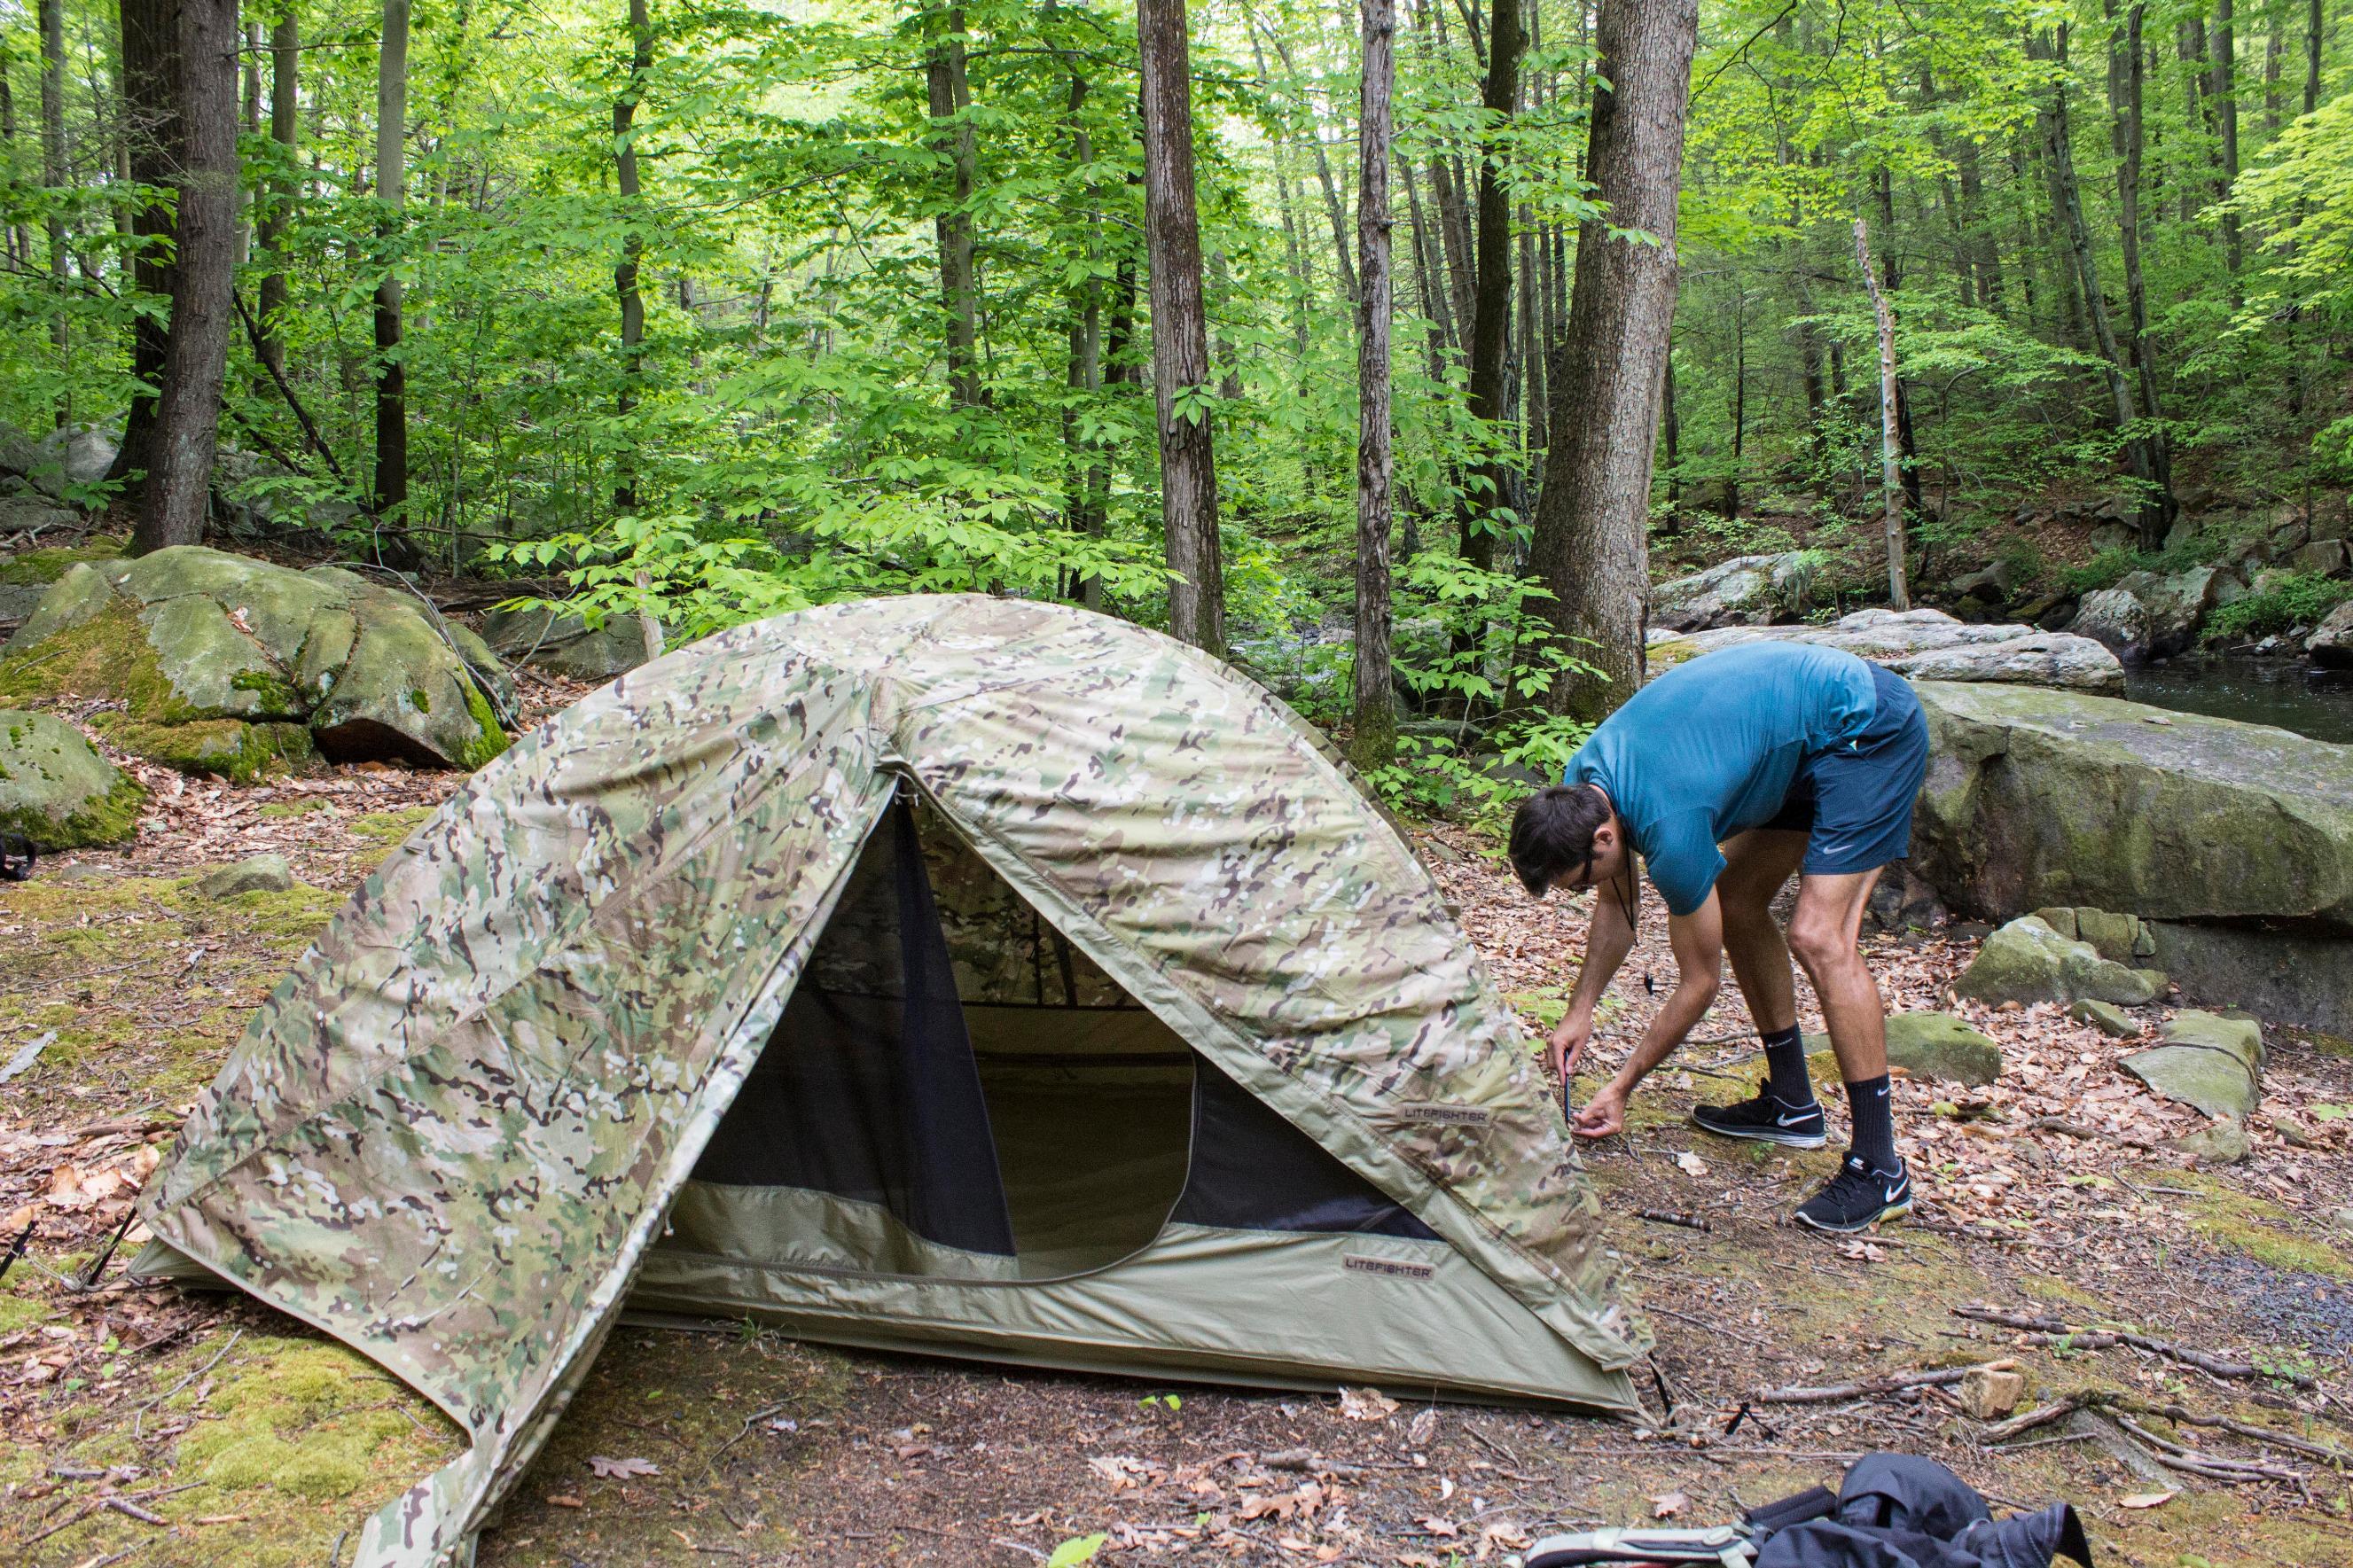 LiteFighter on X: Check out our LiteFighter1 tent in action! #litefighter  #camping #tents #outdoorsurvival  / X